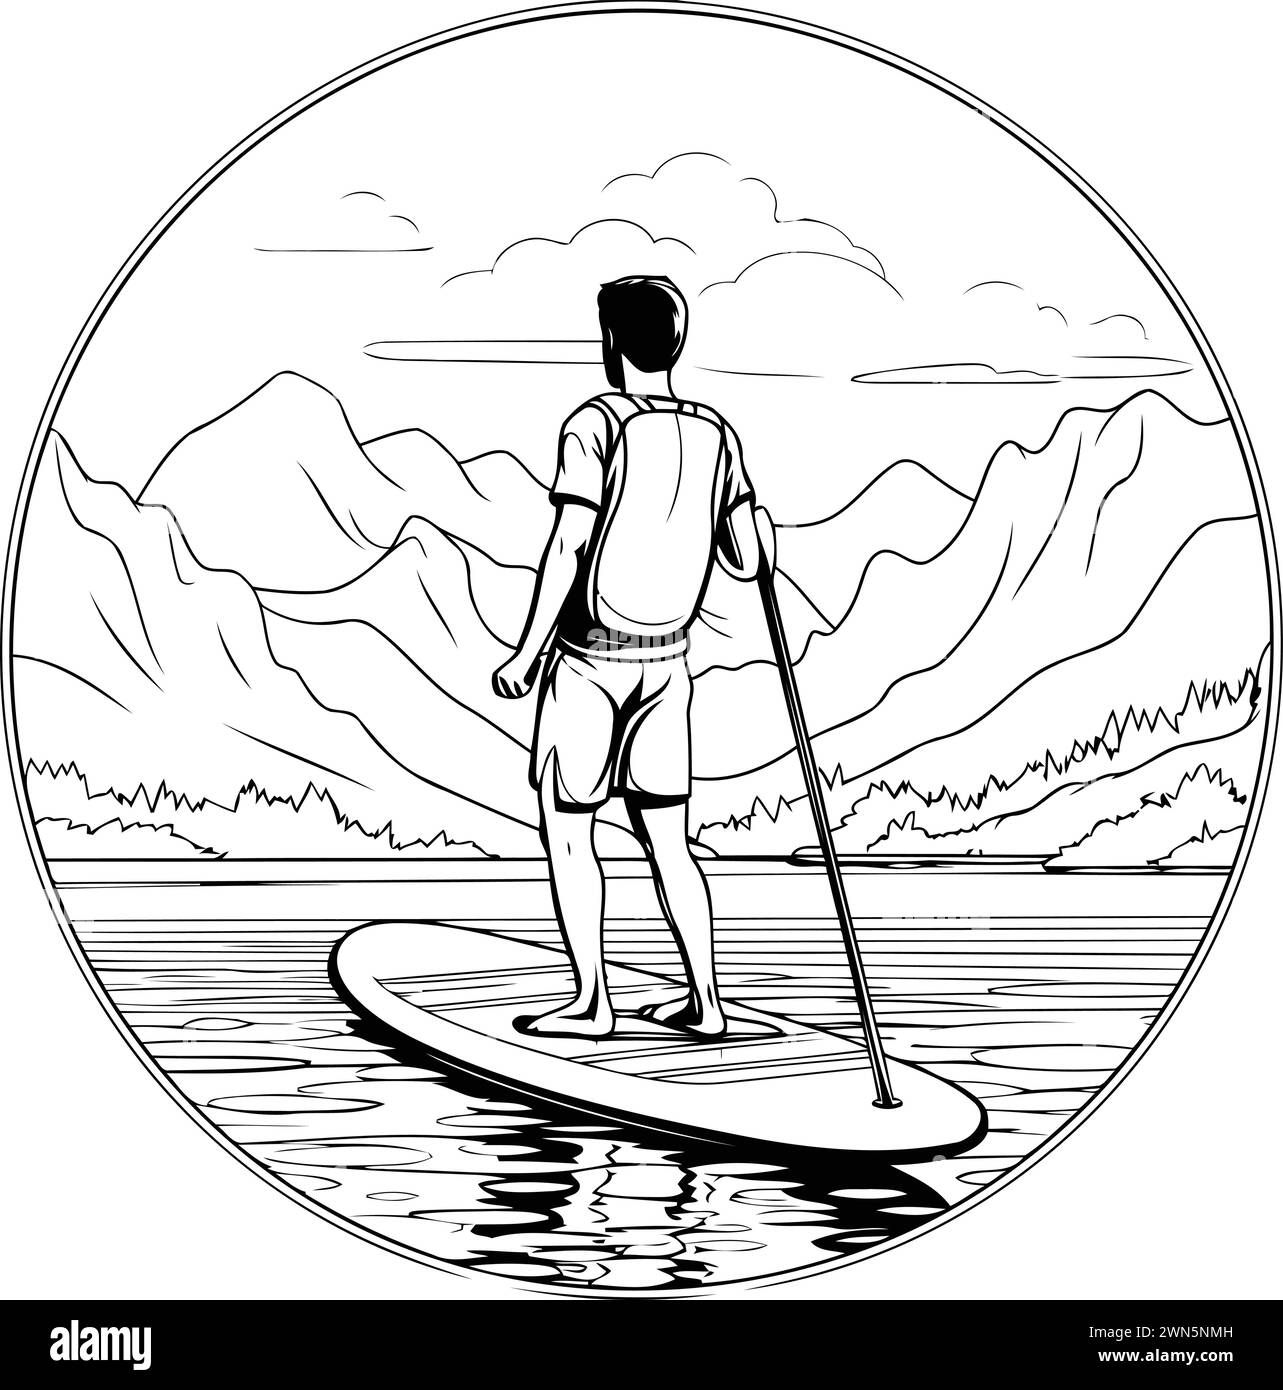 Stand up paddle board. Stand up paddleboarding. Vector illustration. Stock Vector